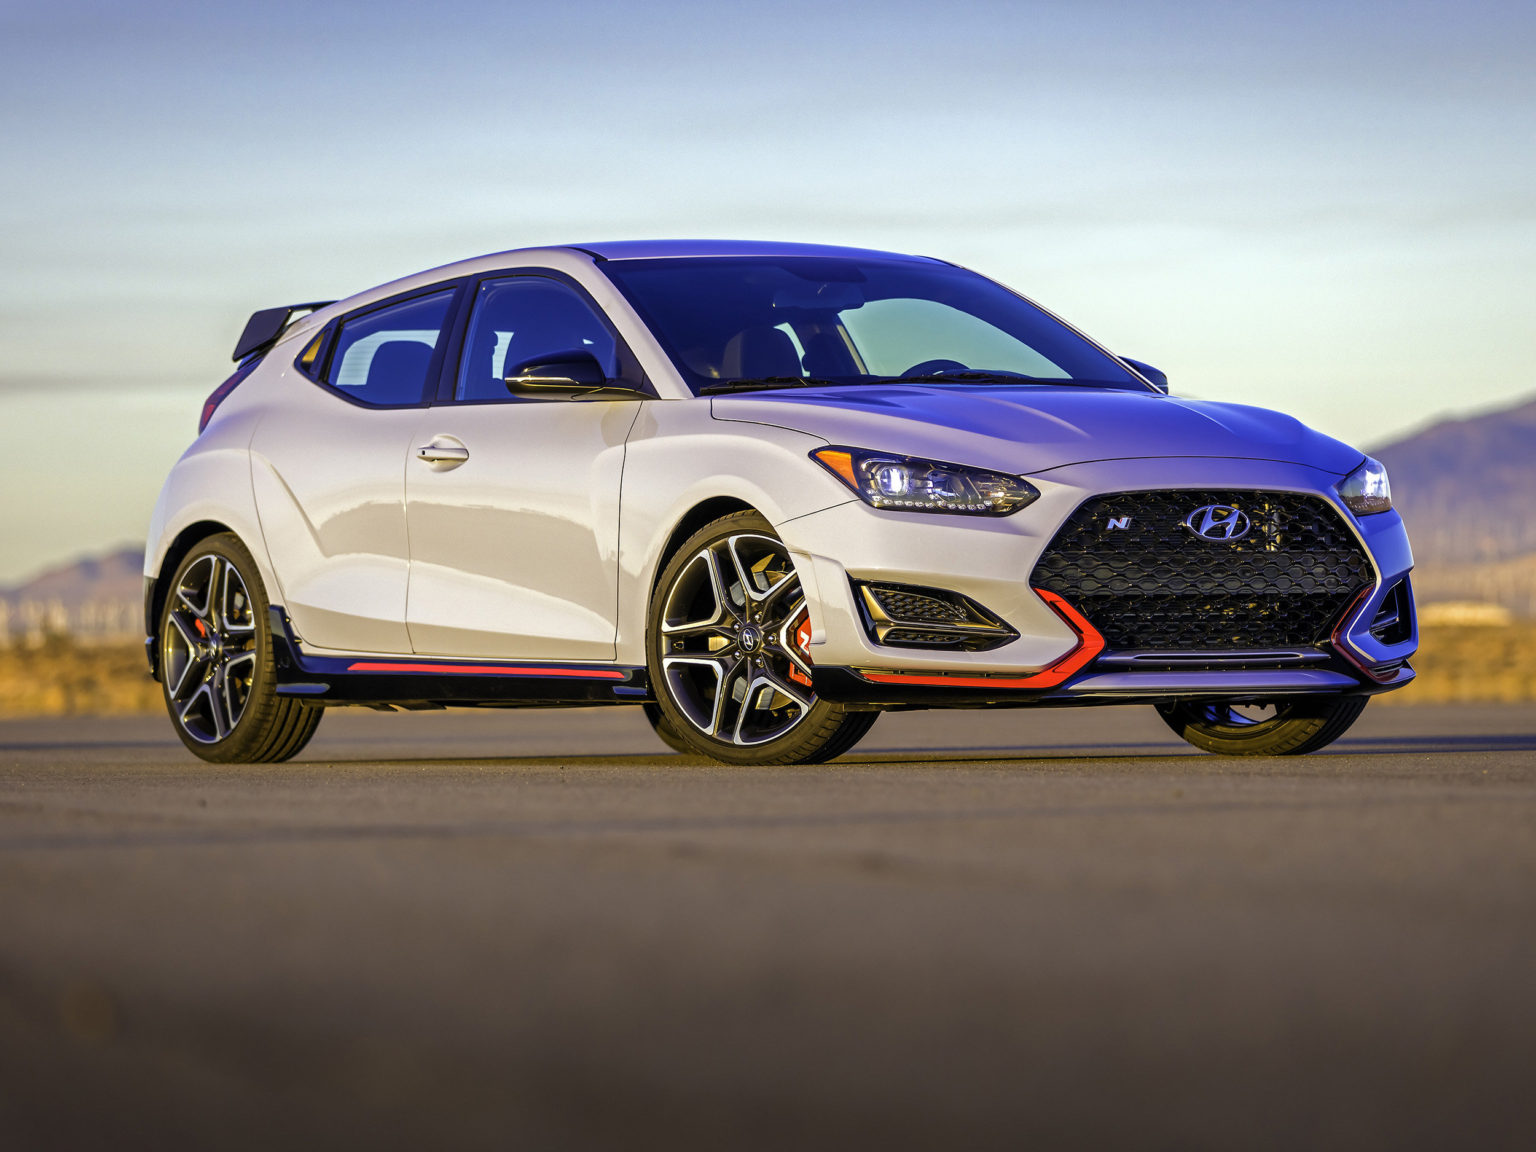 Hyundai is enhancing the Veloster N for the 2020 model year.